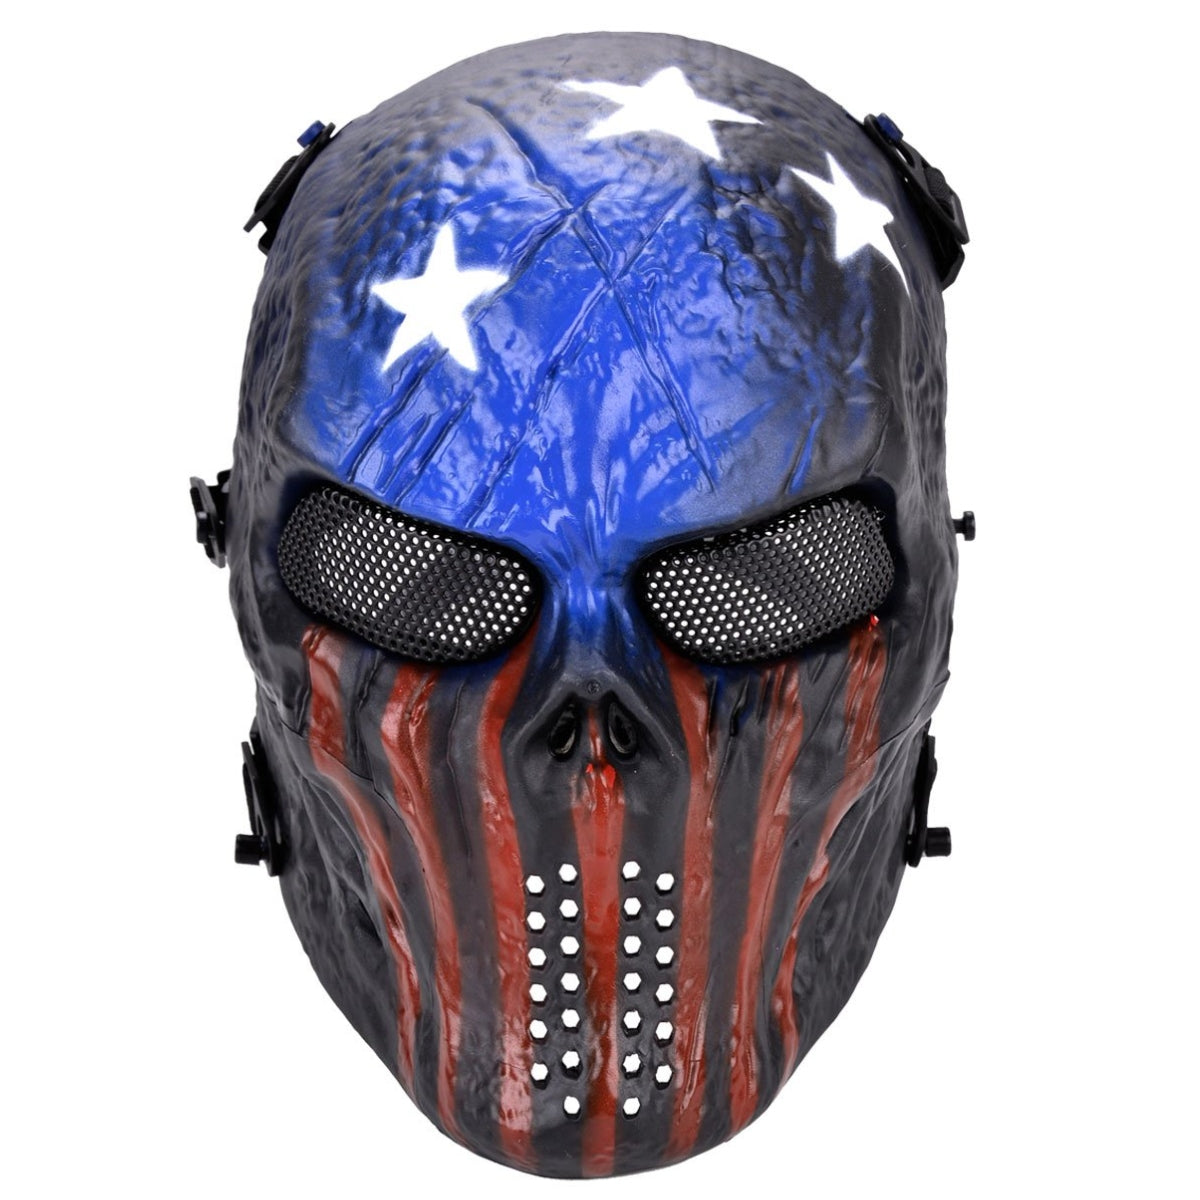 USA Painted Scary Halloween Party Full Face Airsoft Mask